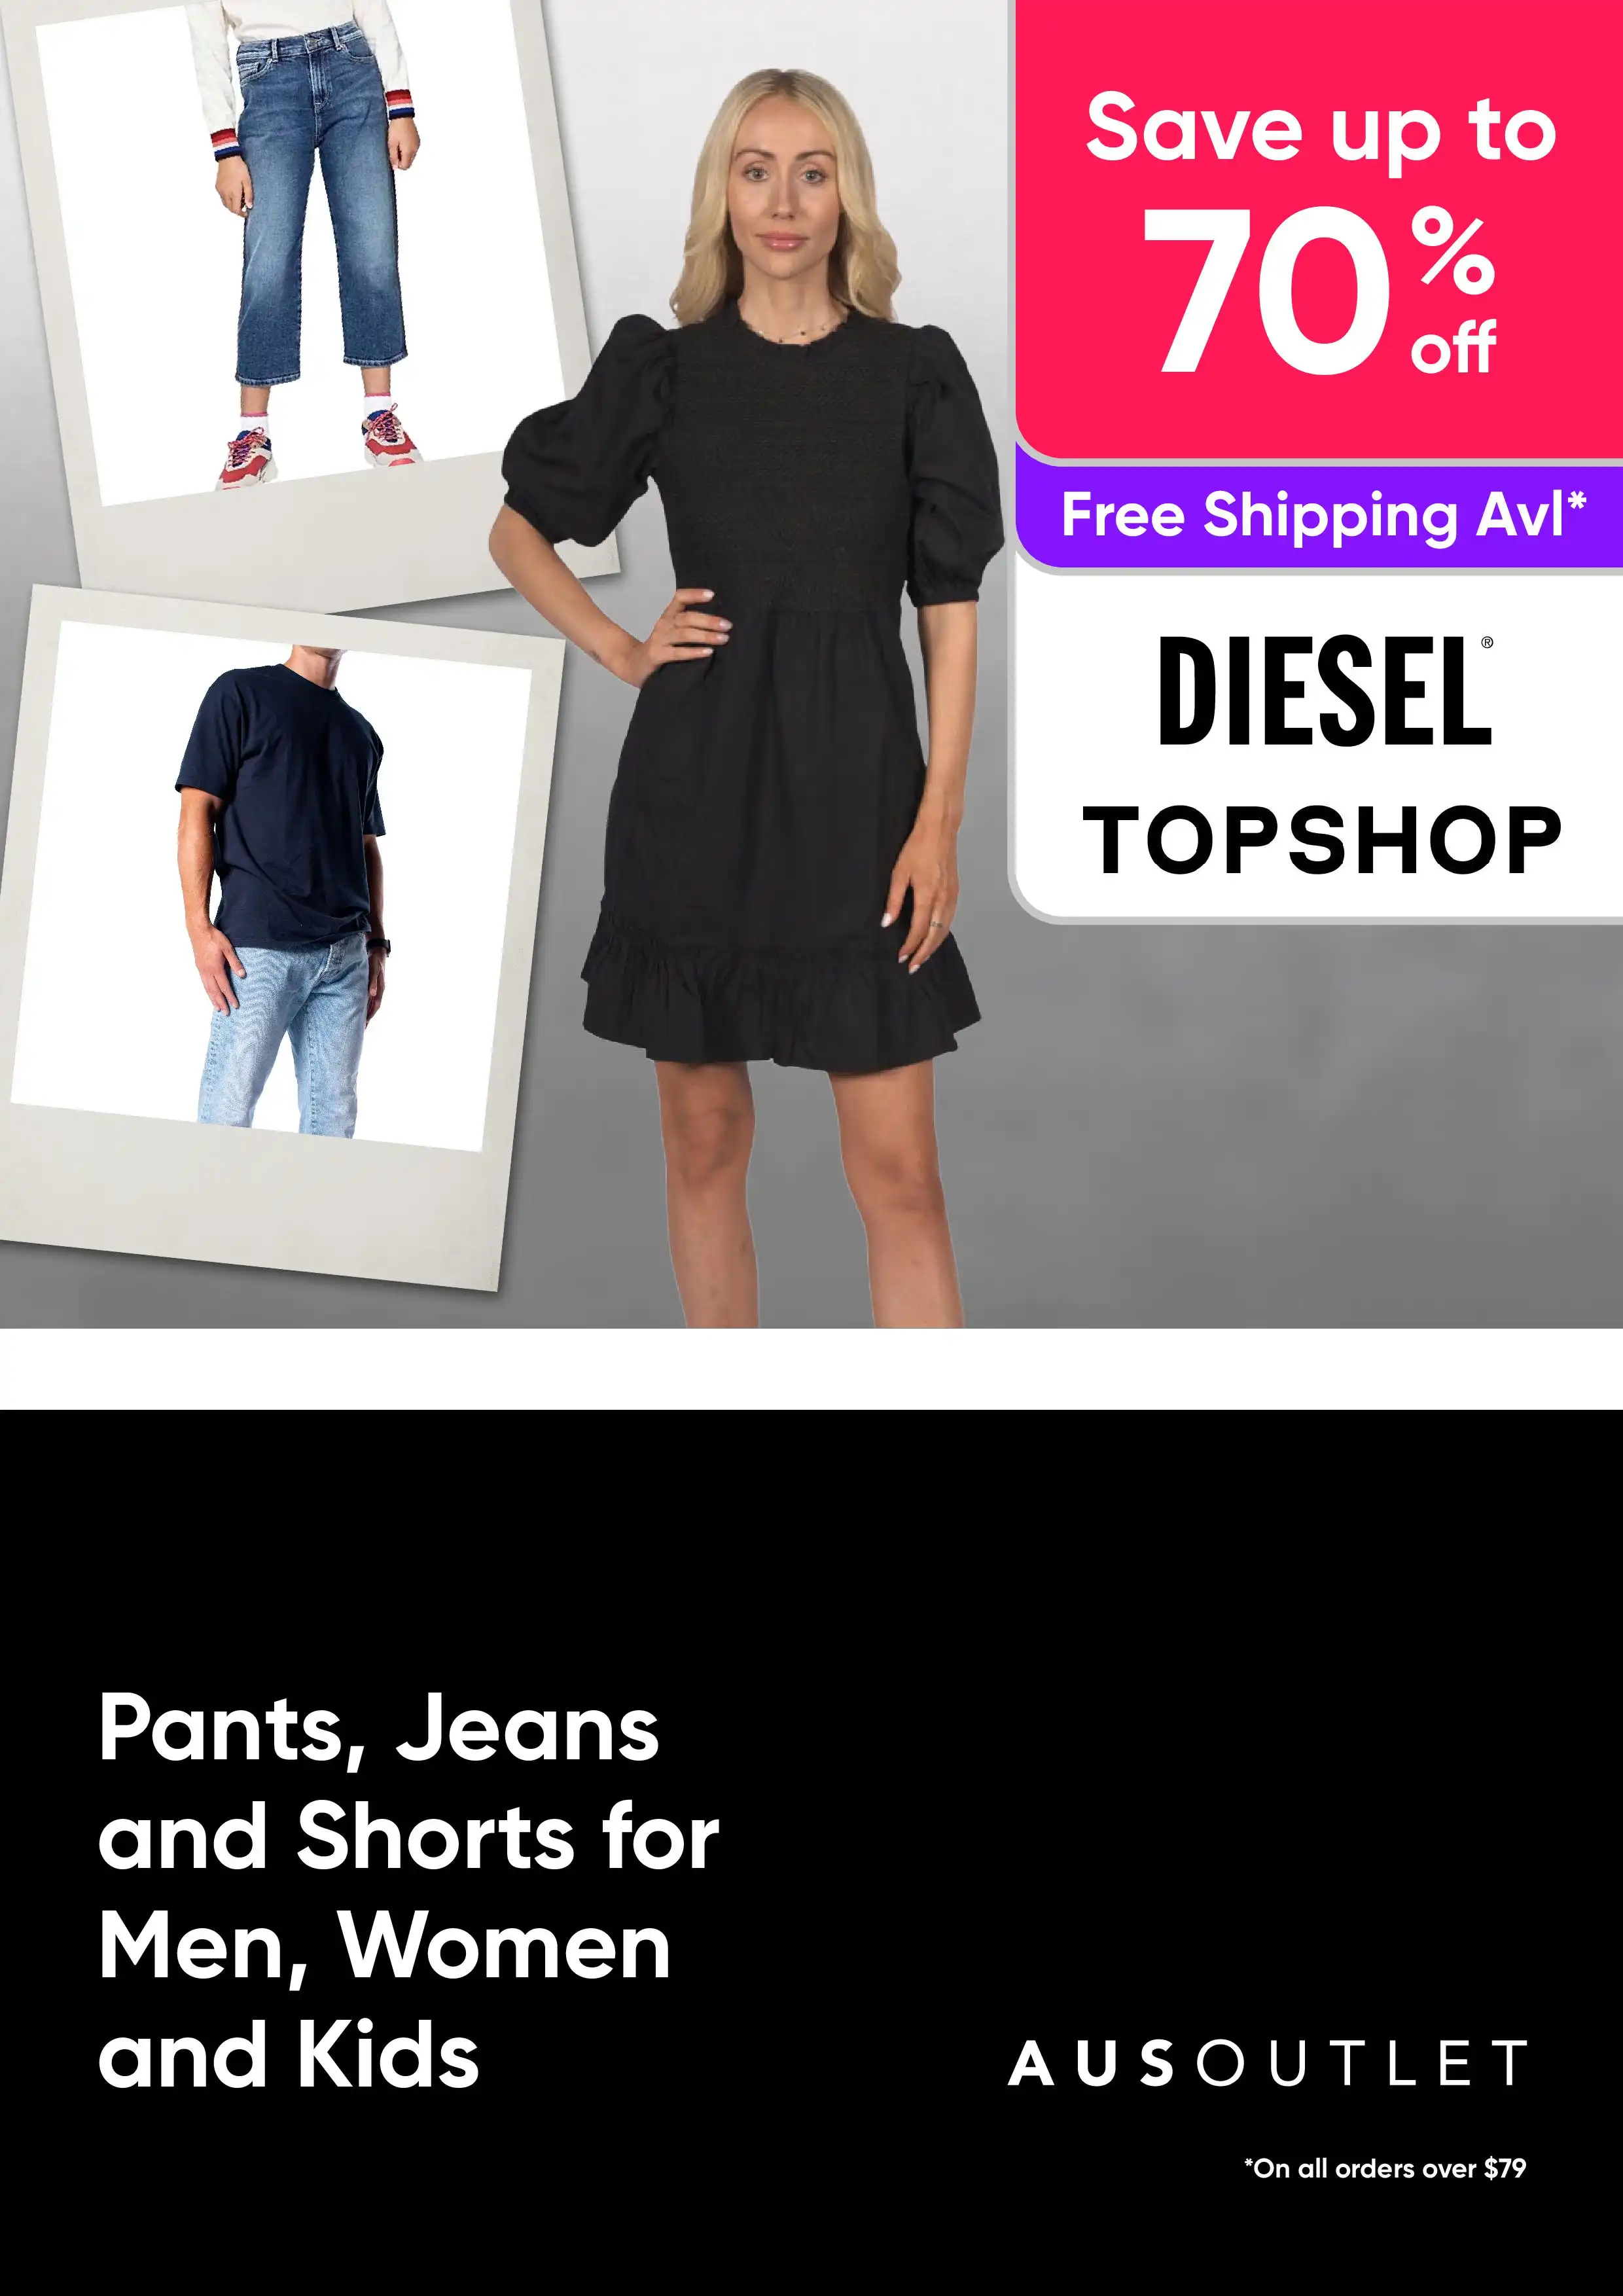 Shop Specials on Pants, Jeans and Shorts for Men, Women and Kids - Save Up to 75%